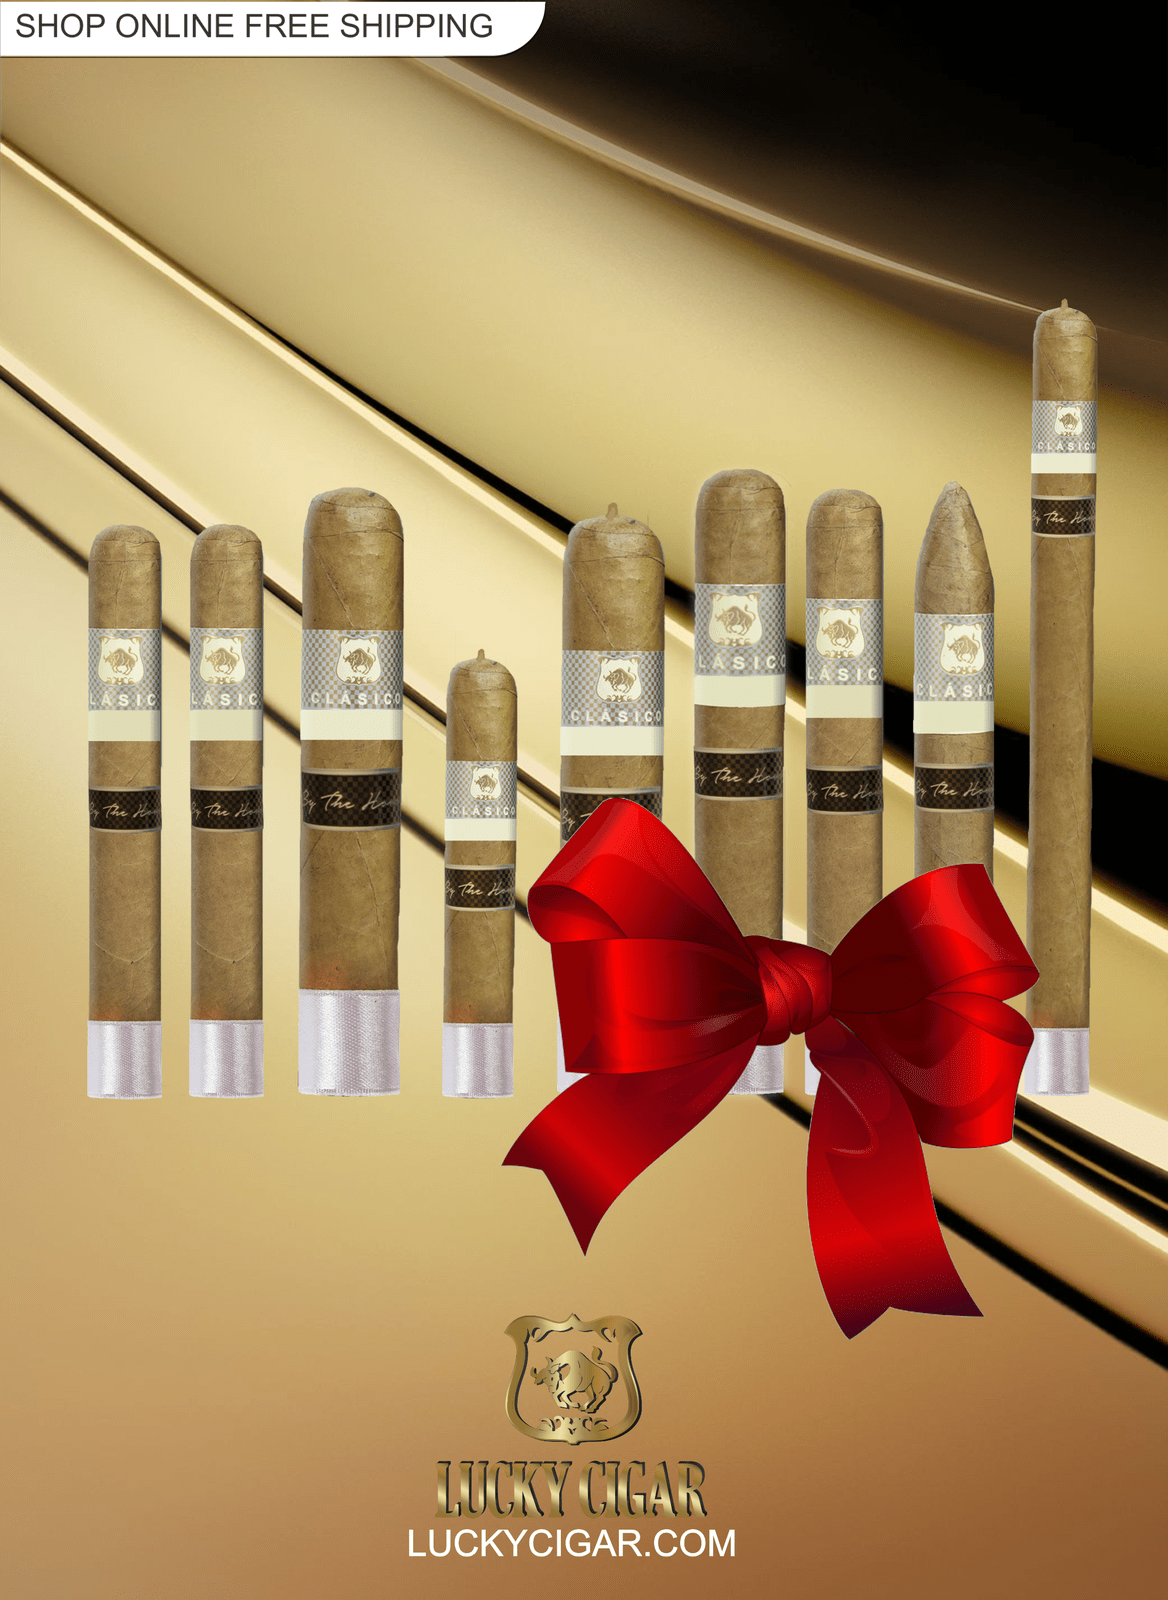 Classic Cigars - Classico by Lucky Cigar: Set of 9 Cigars, All Sizes